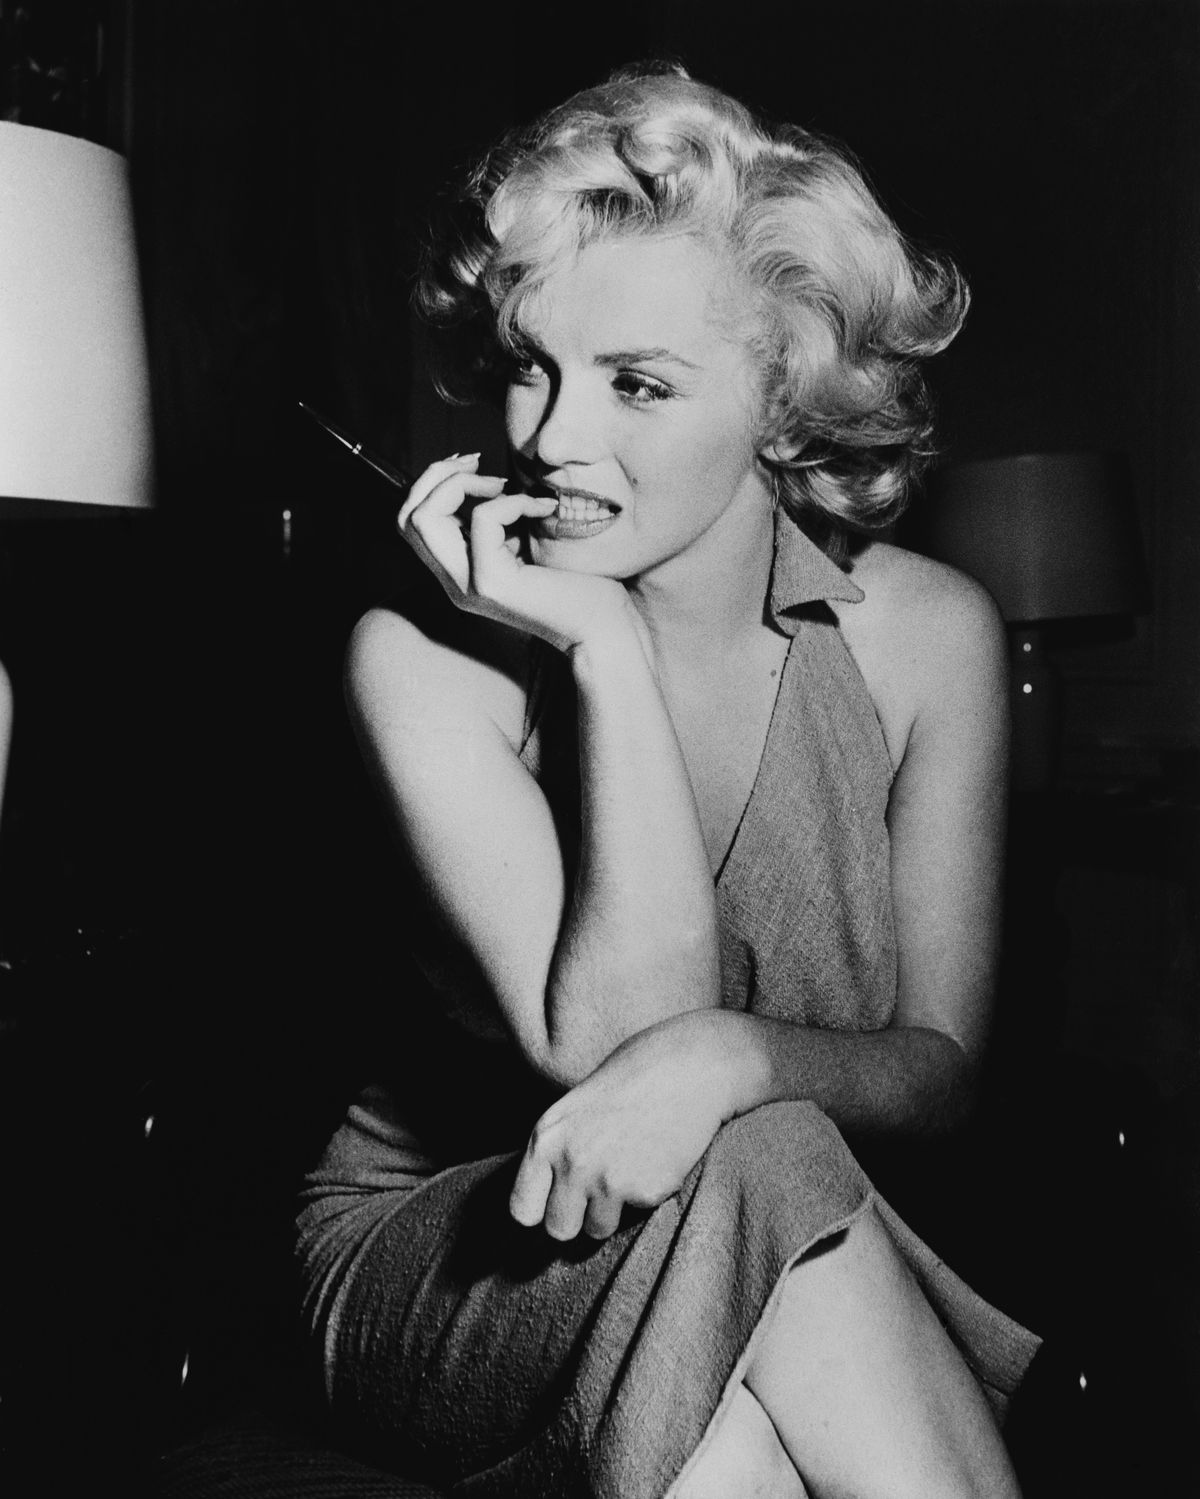 The real story behind Marilyn film Blonde